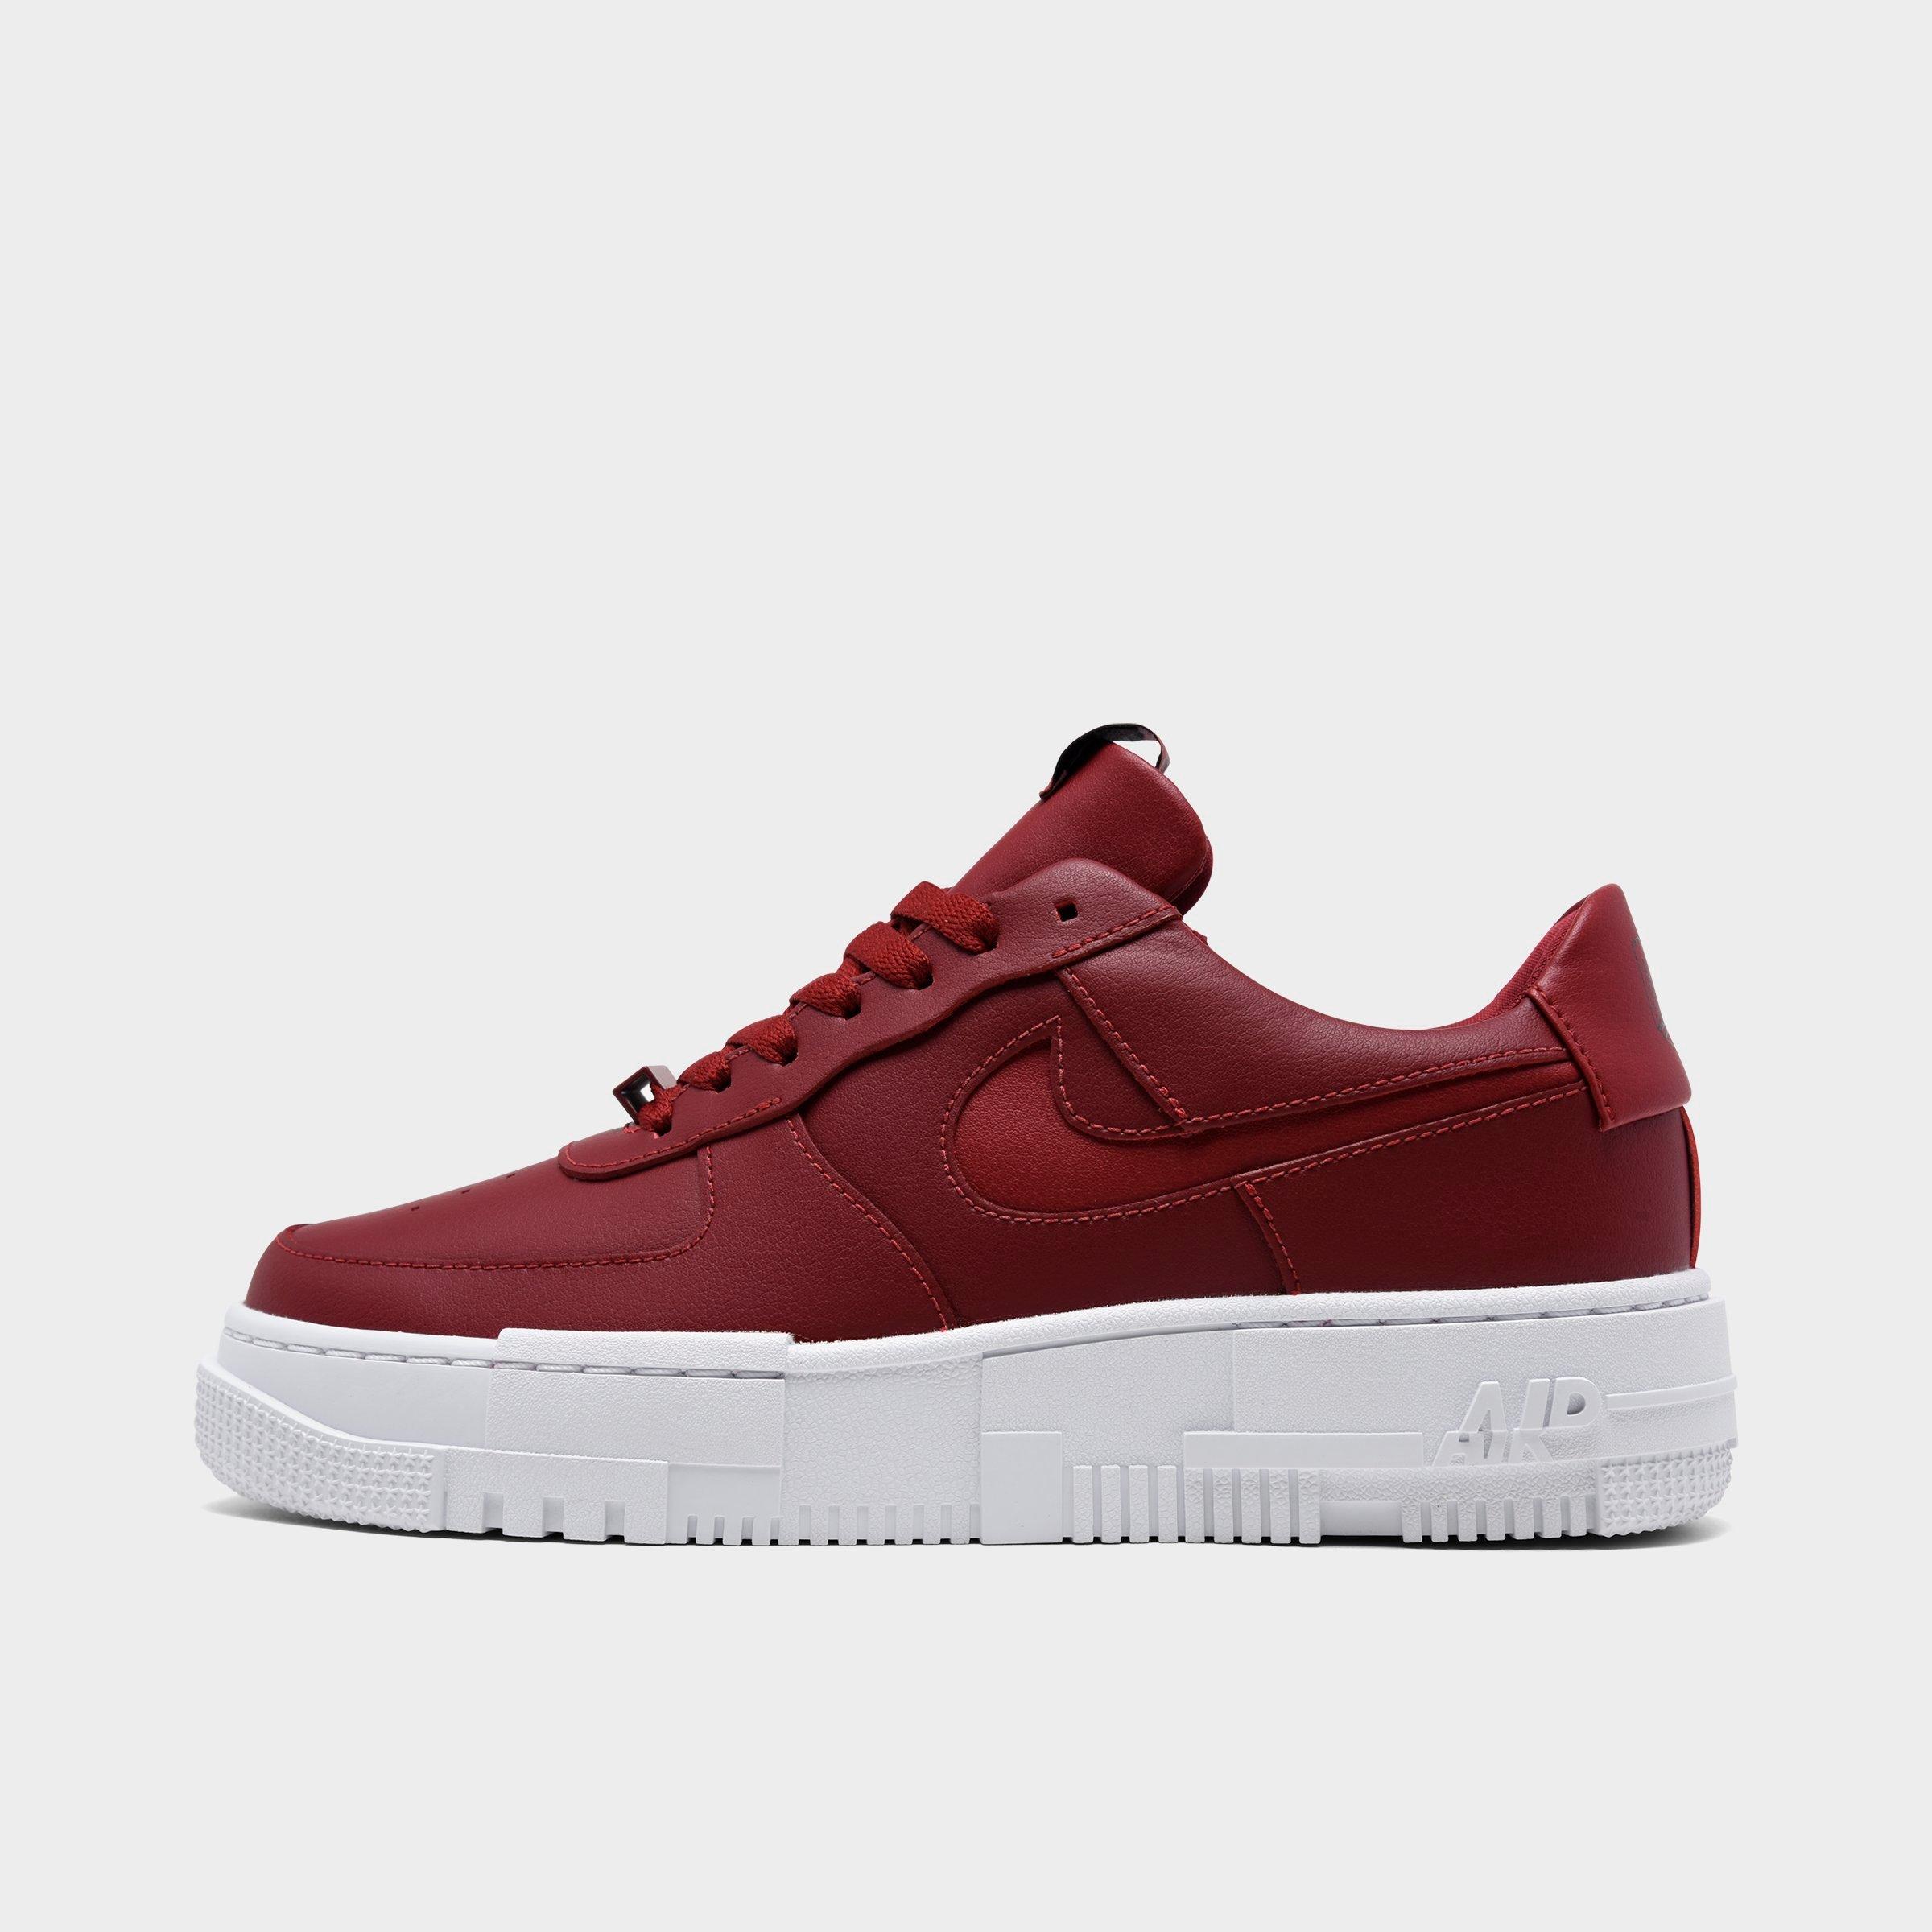 jd sports pink air force 1